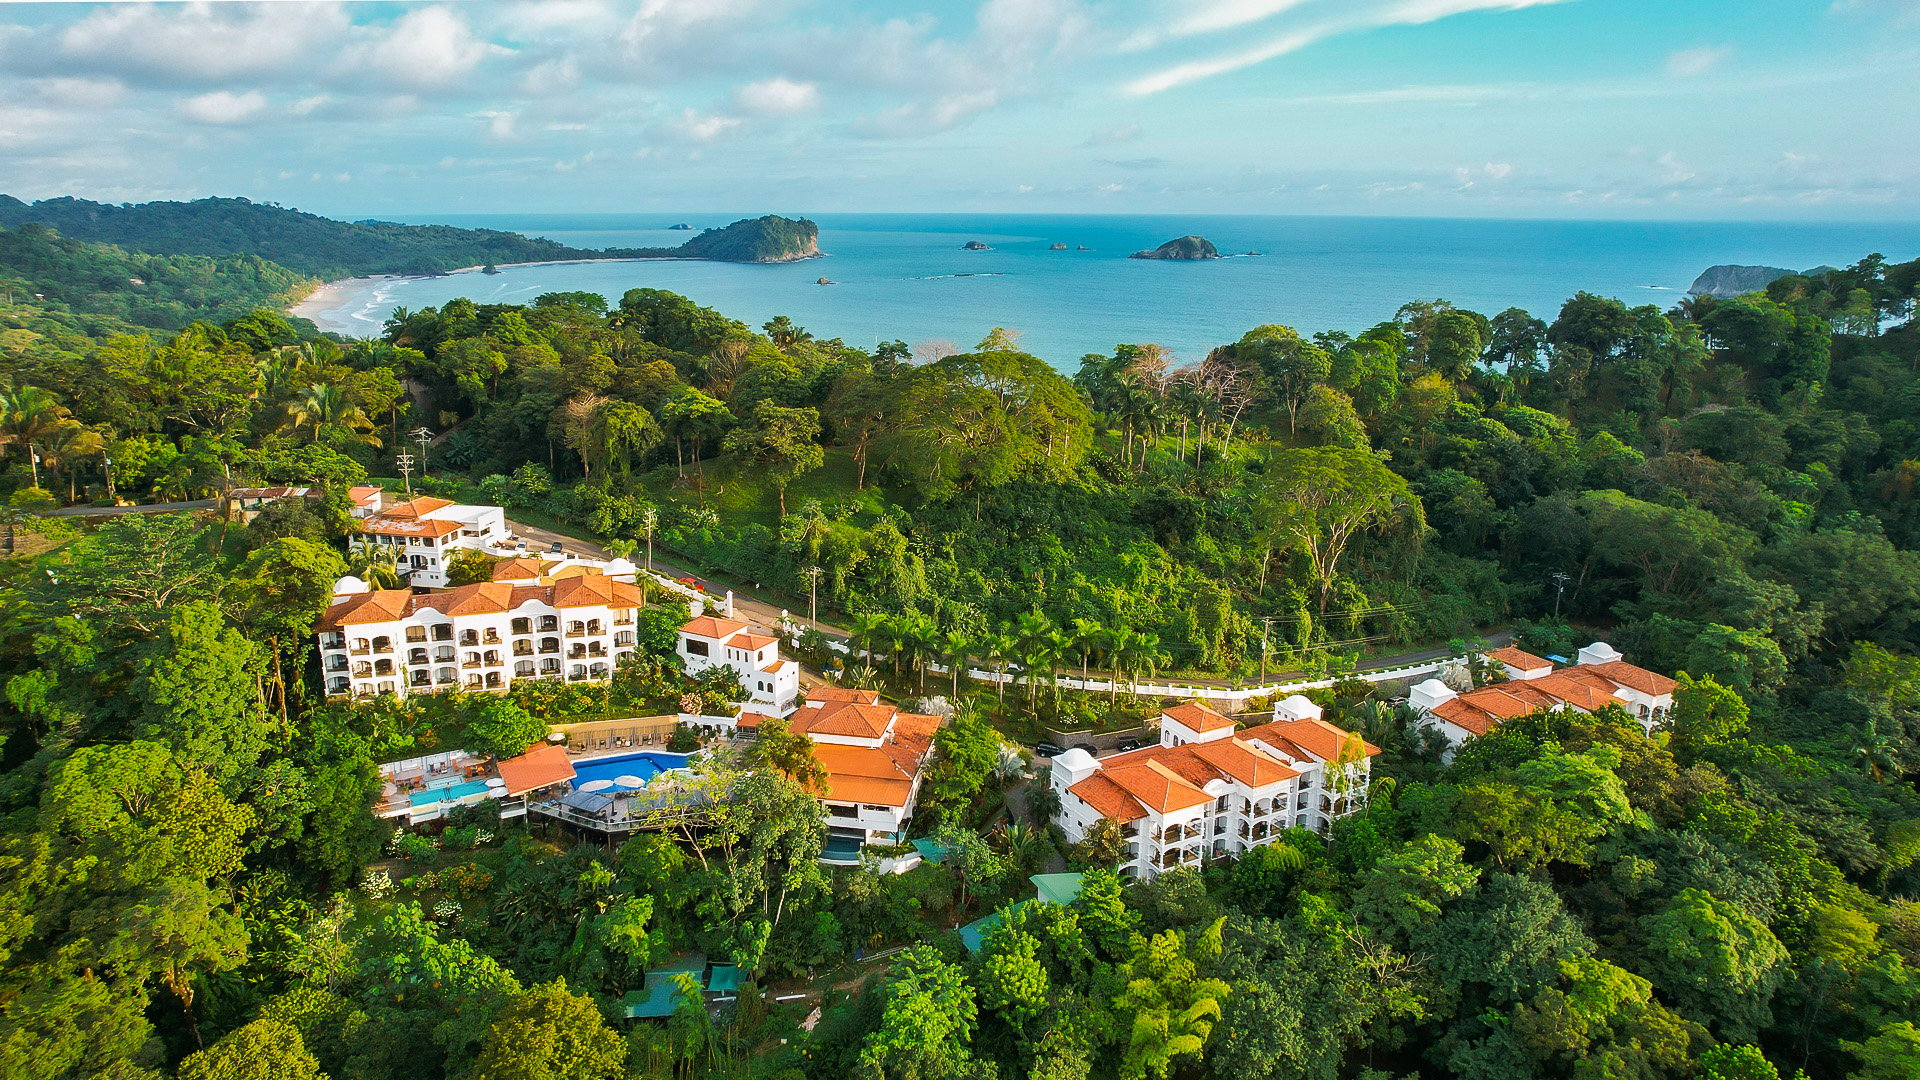 Aerial view of a tropical resort nestled in lush greenery with a view of the ocean and distant islands.